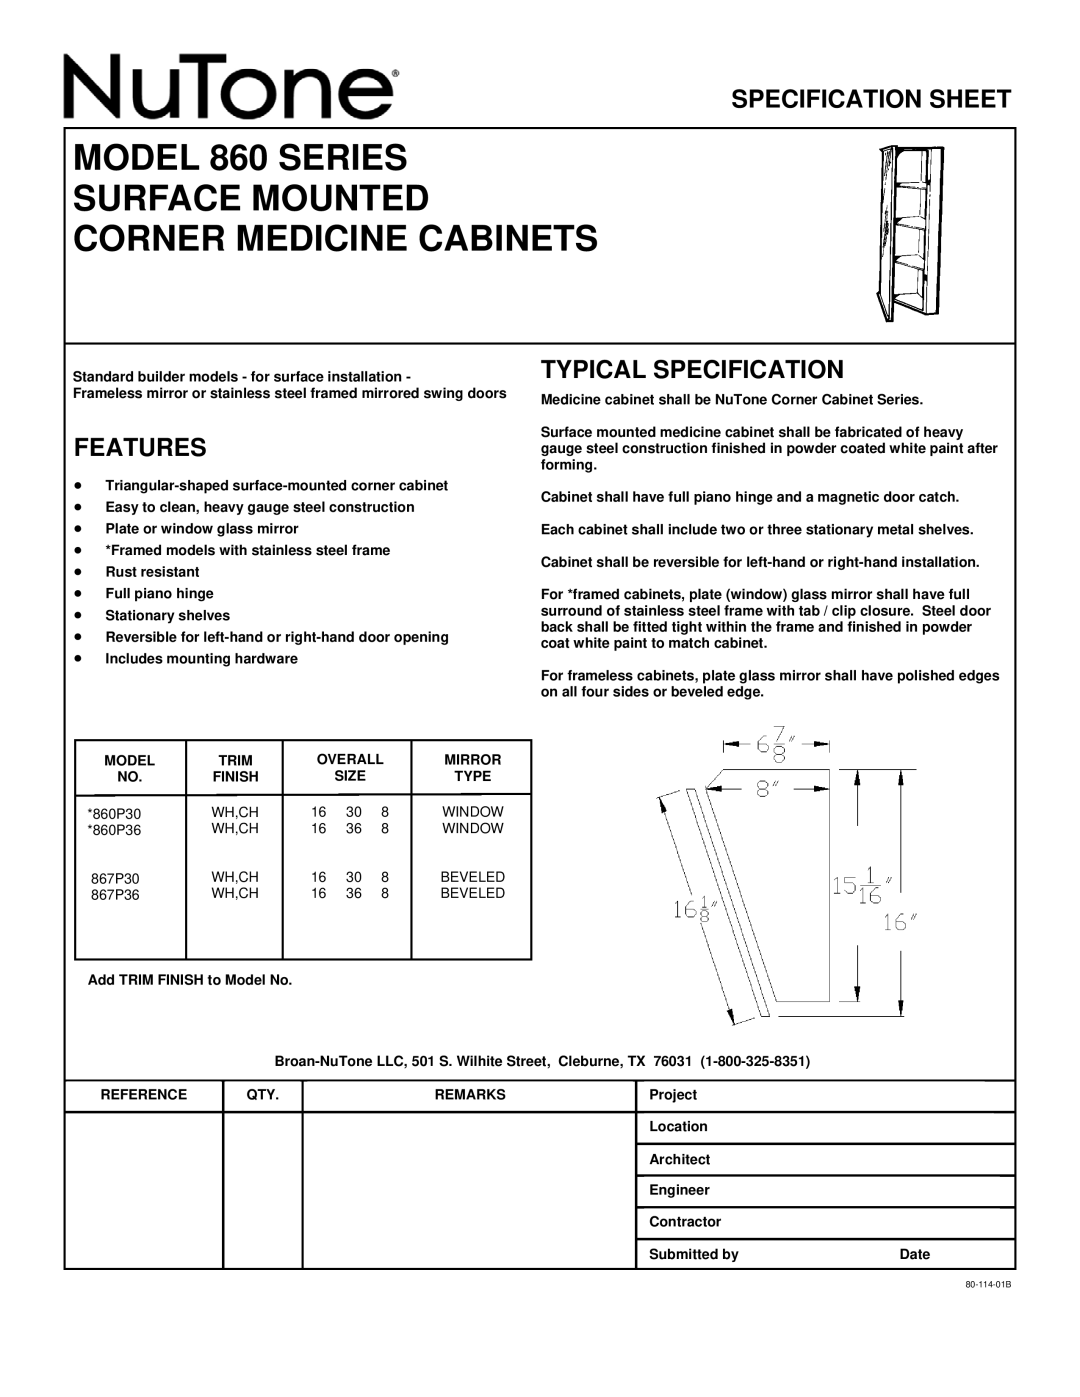 NuTone specifications MODEL 860 SERIES SURFACE MOUNTED, Corner Medicine Cabinets, Specification Sheet, Features 